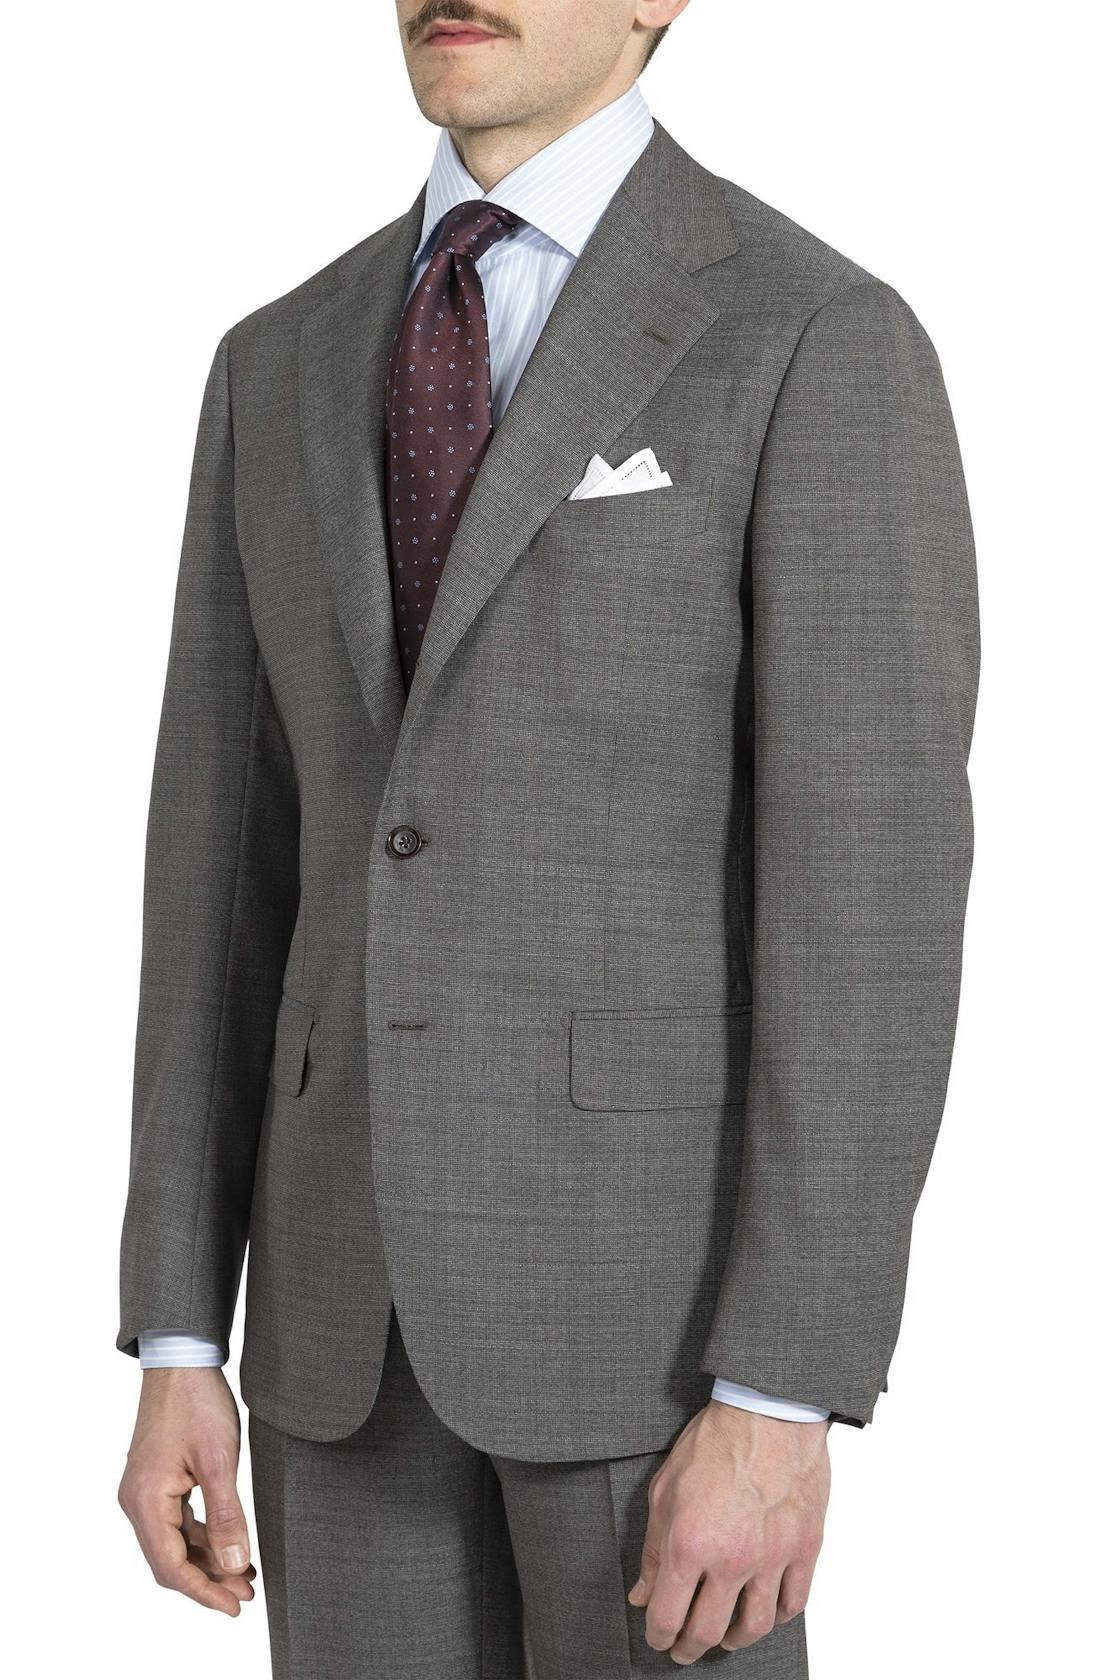 The Armoury by Ring Jacket Model 3A Taupe Wool Suit